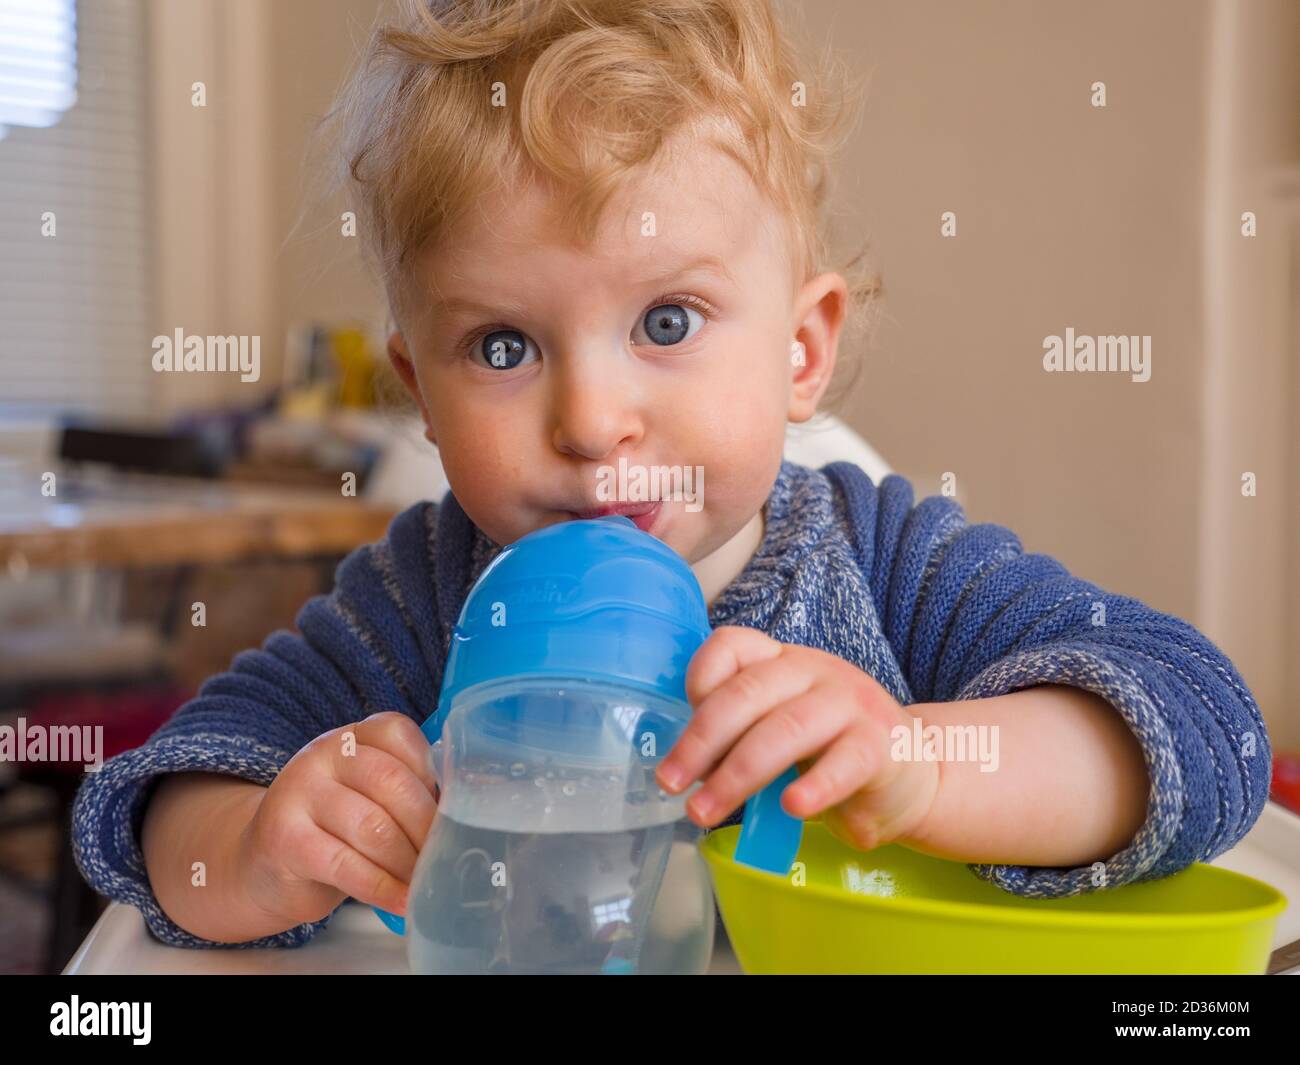 One year old baby boy drinking water while eating Stock Photo